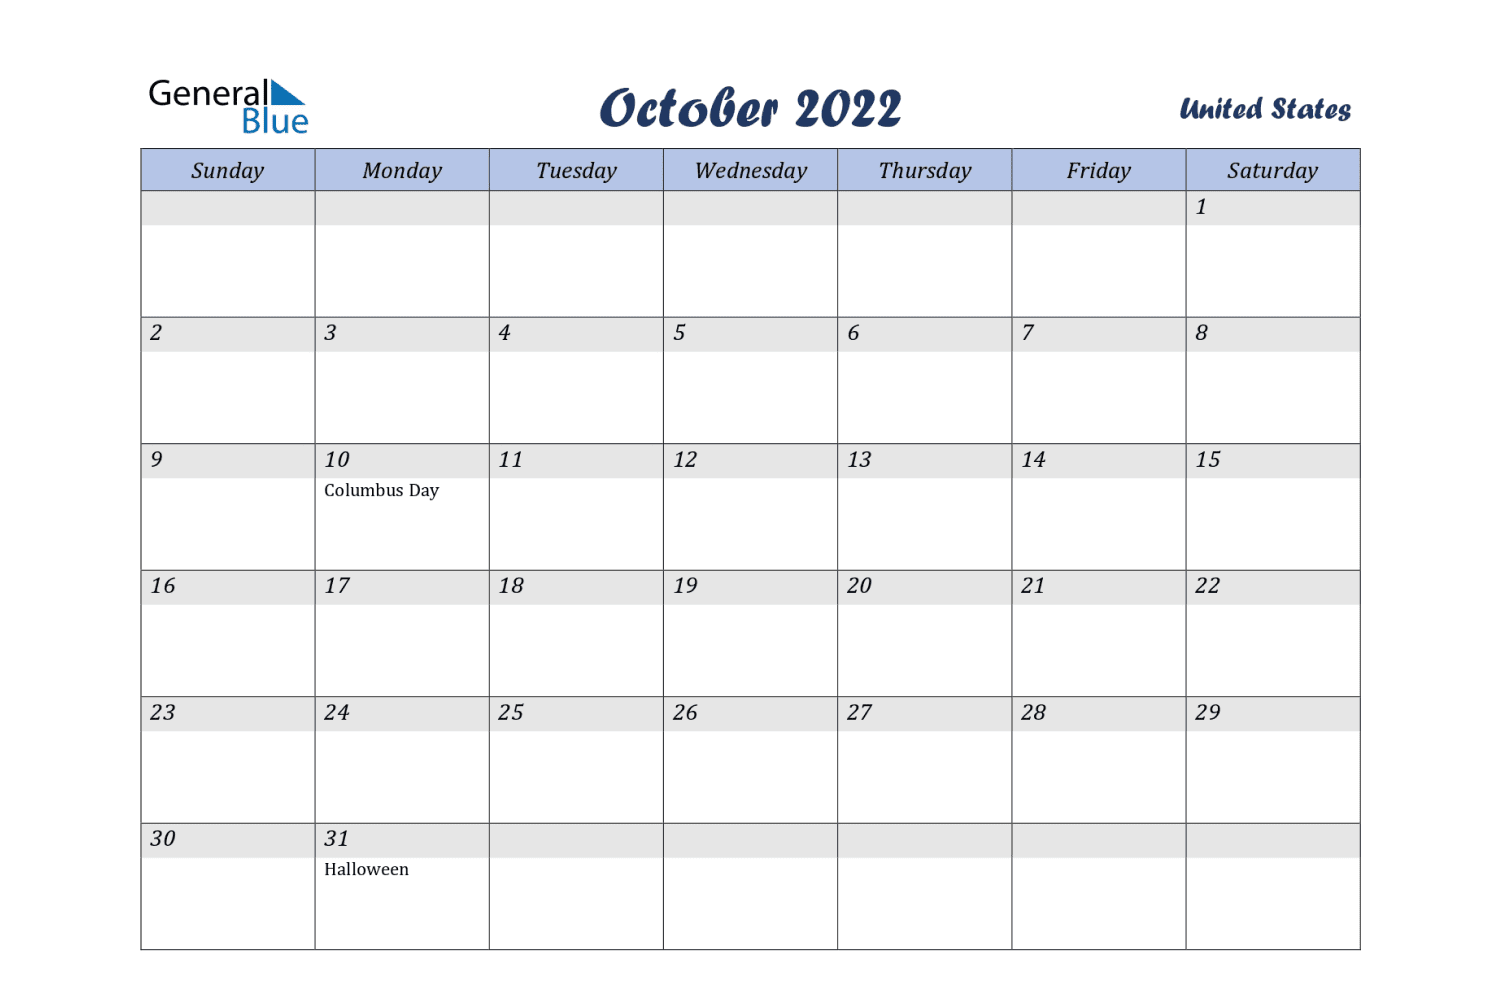 October calendar with white and gray background with USA holidays.